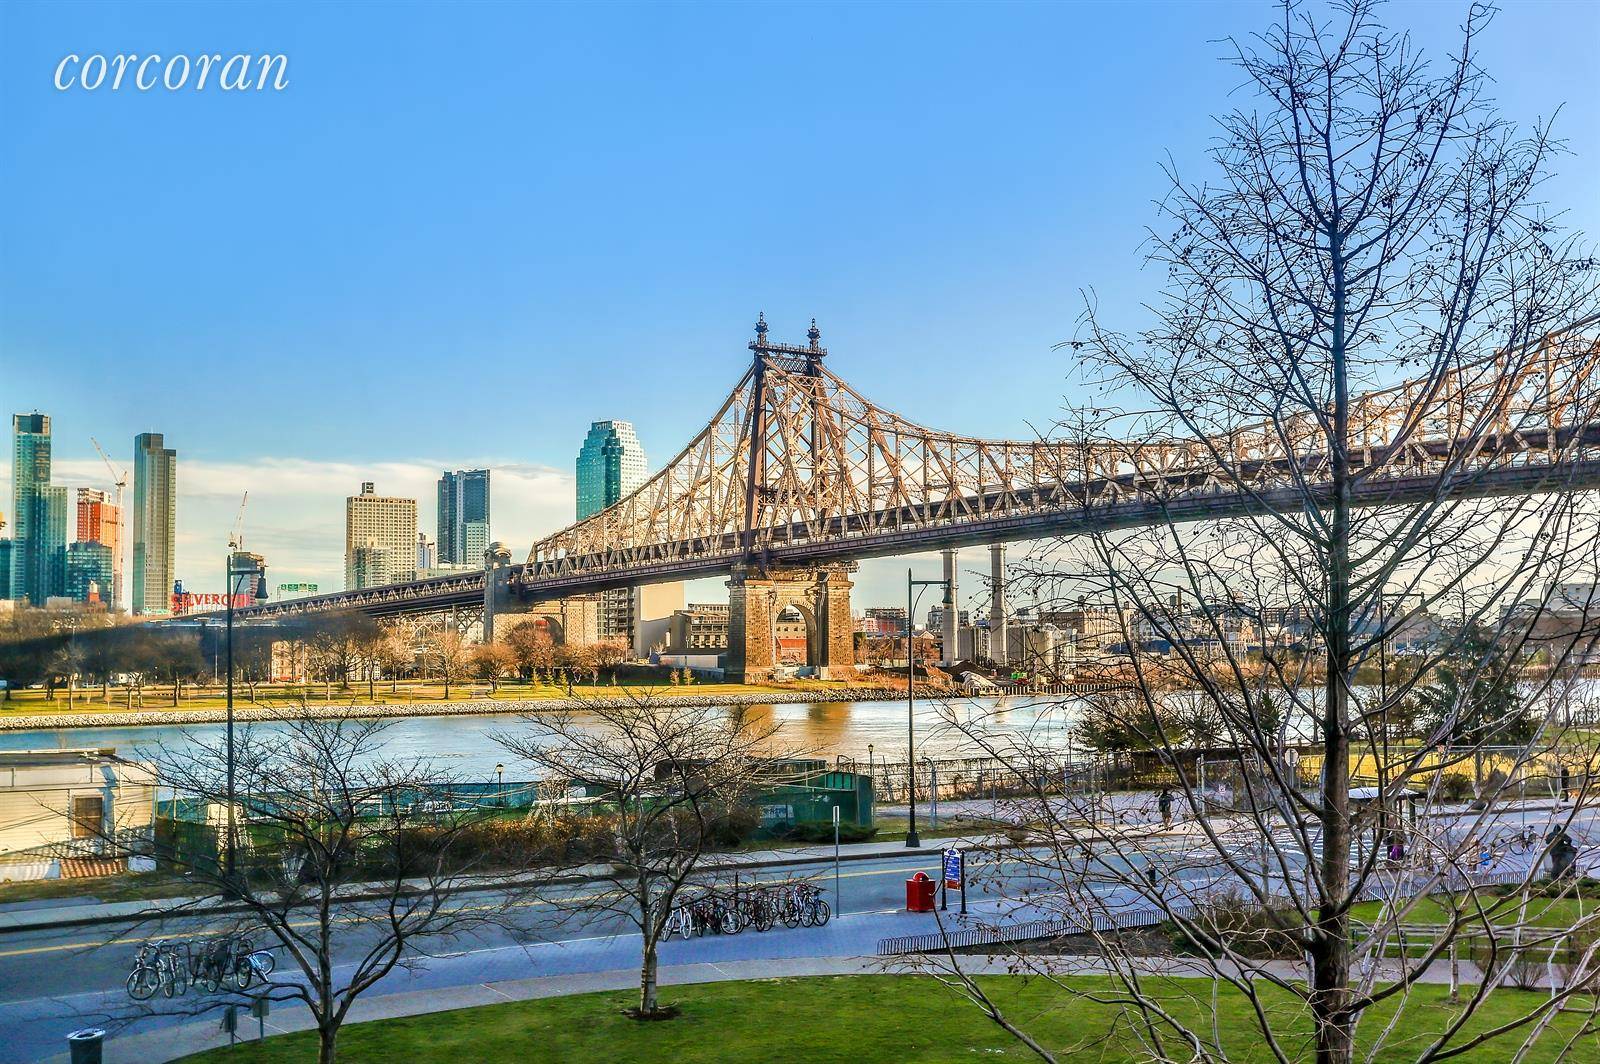 New Massive 2 Bedroom Apartment in One of The Most Desirable Condo Buildings on Roosevelt Island !